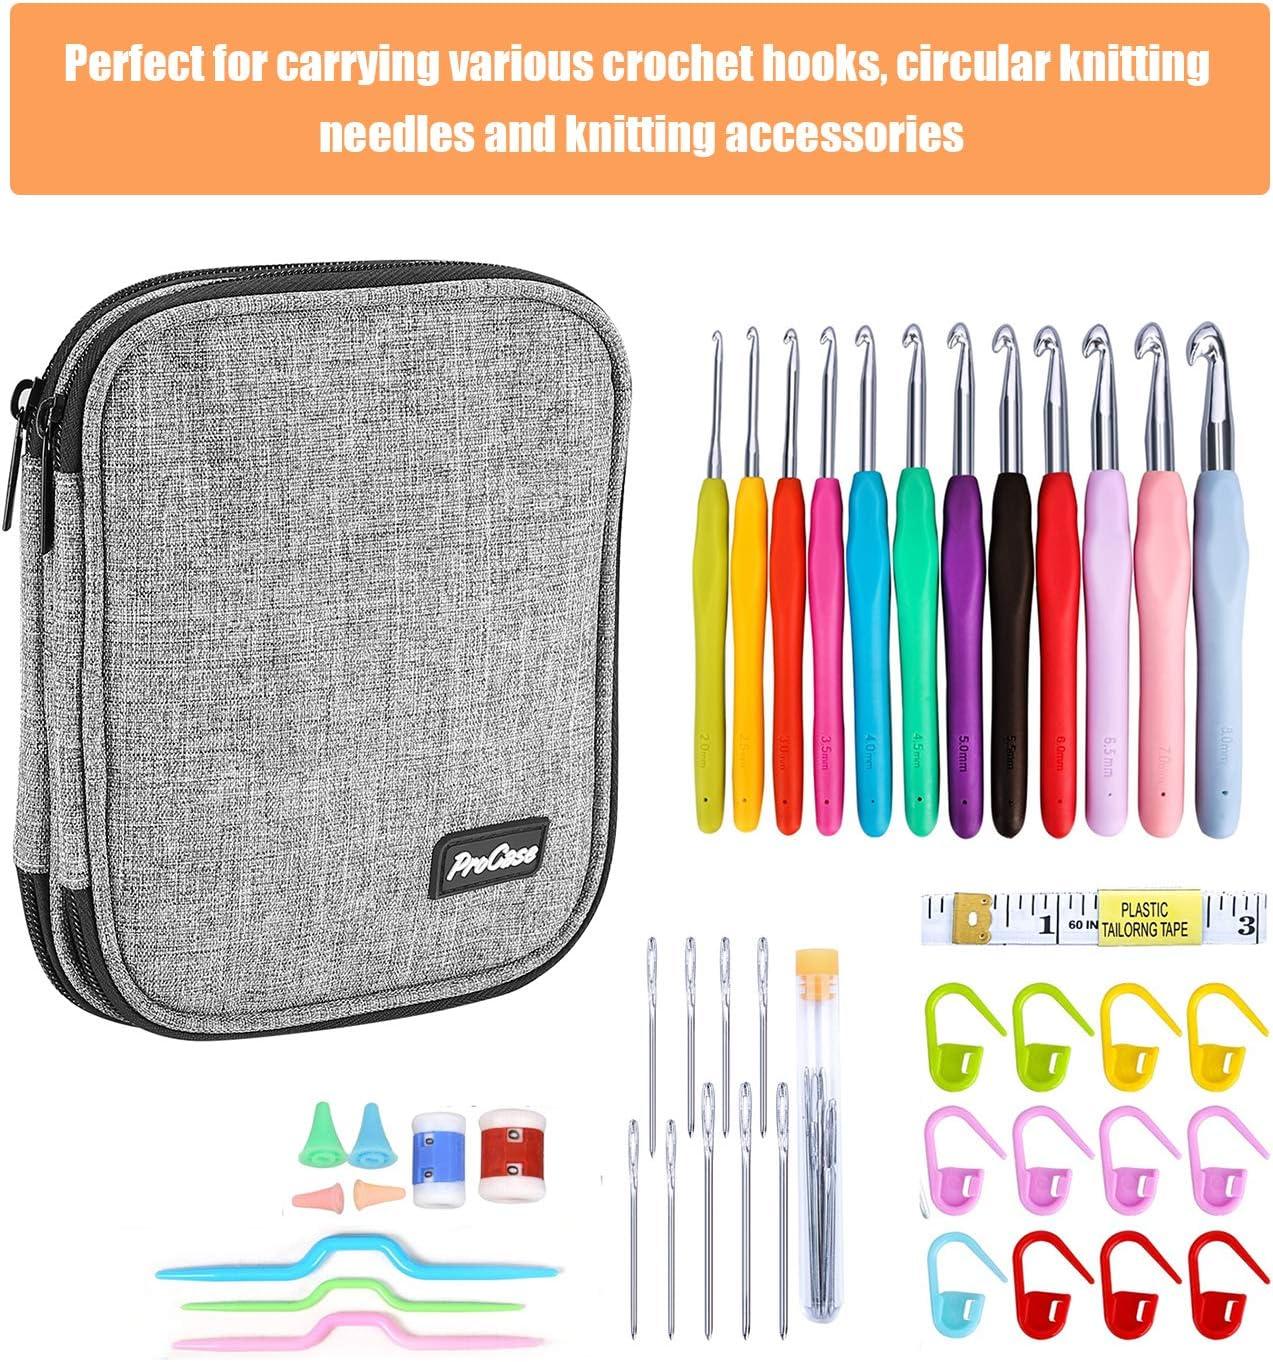 ProCase Crochet Hook Case (up to 6.5 Inches) Travel Organizer